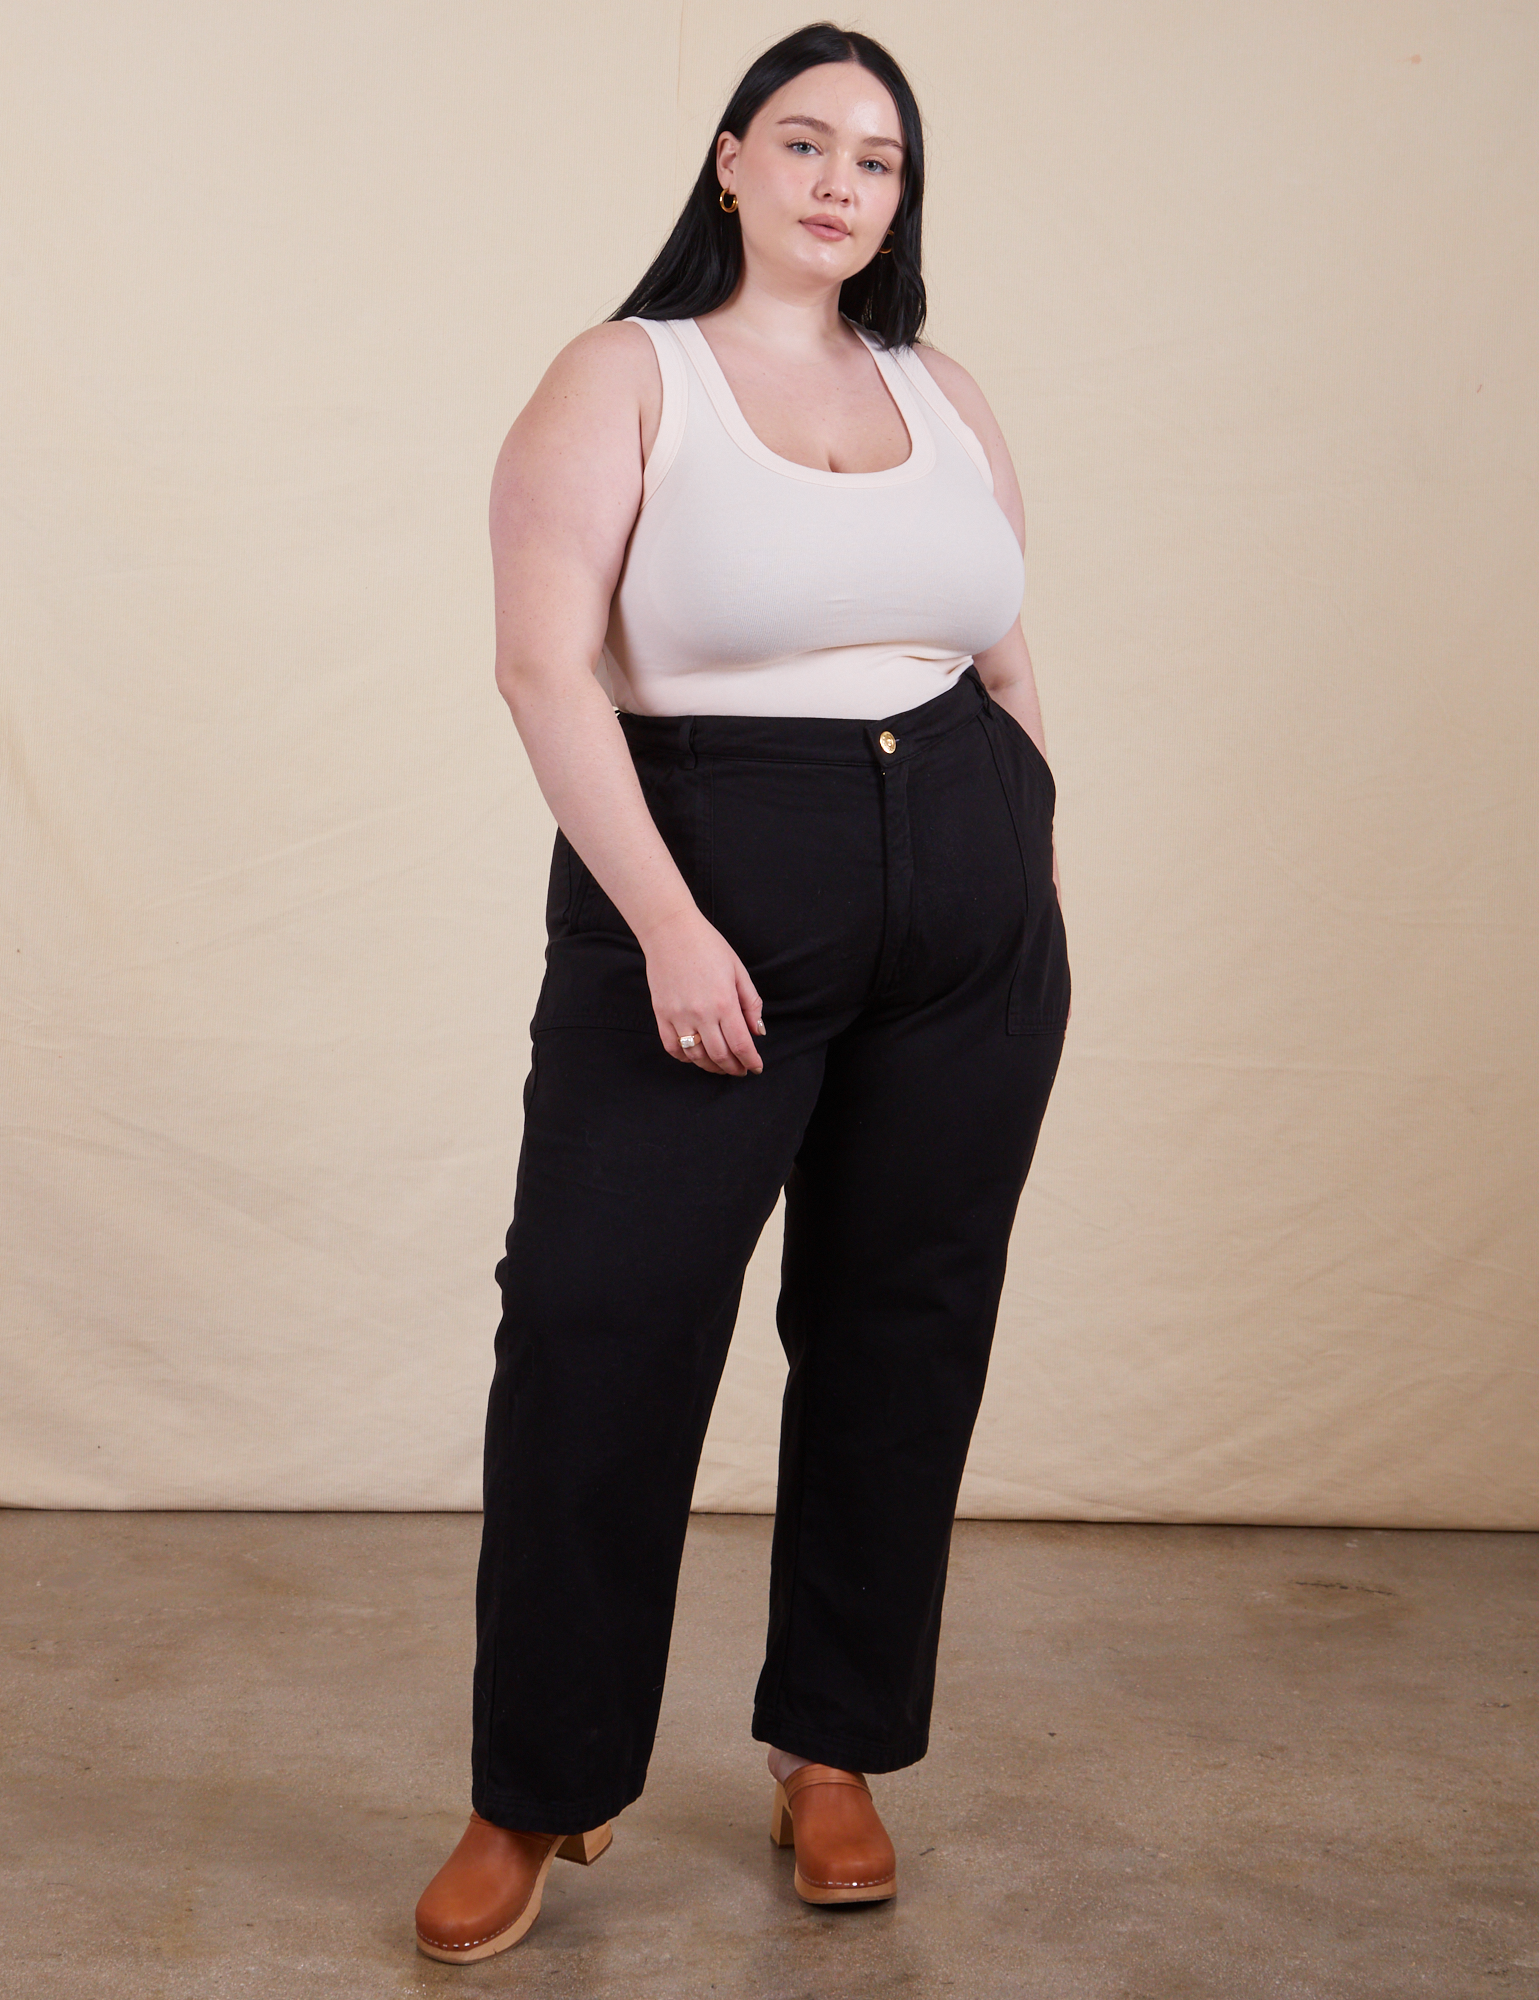 Kenna is 5&#39;8&quot; and wearing 1XL  Work Pants in Basic Black paired with a vintage off-white Tank Top